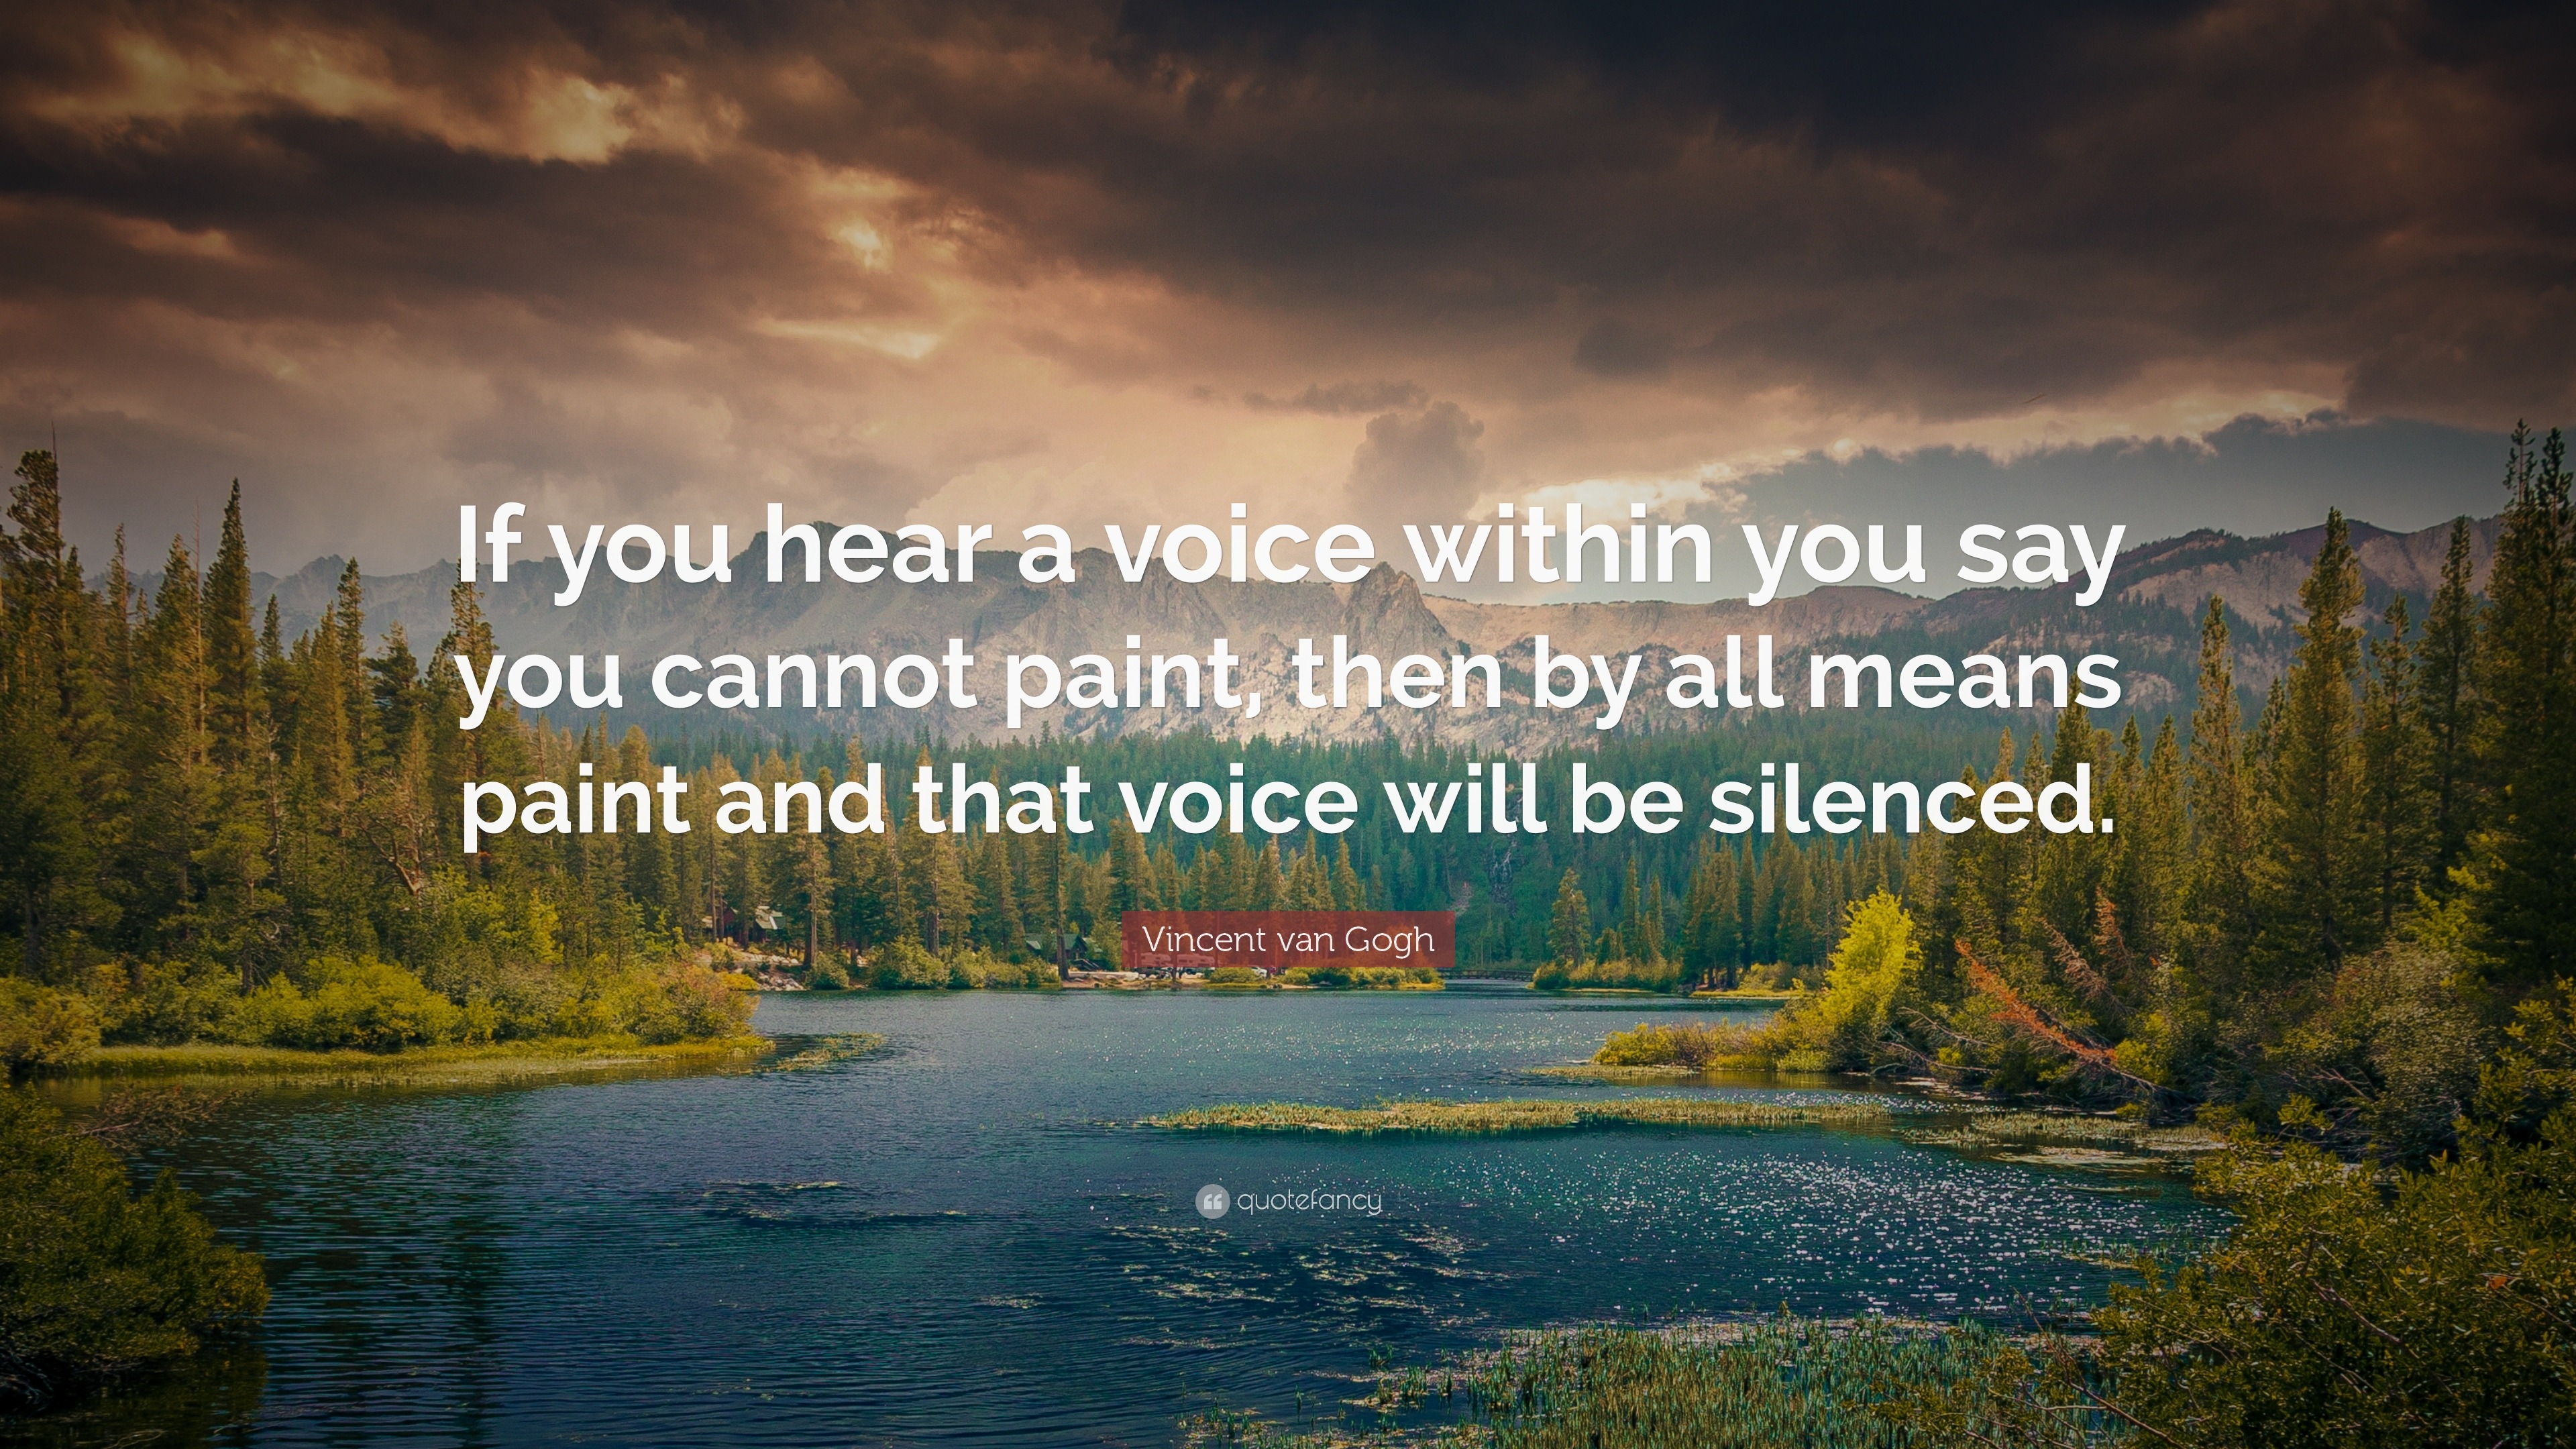 Vincent van Gogh Quote “If you hear a voice within you